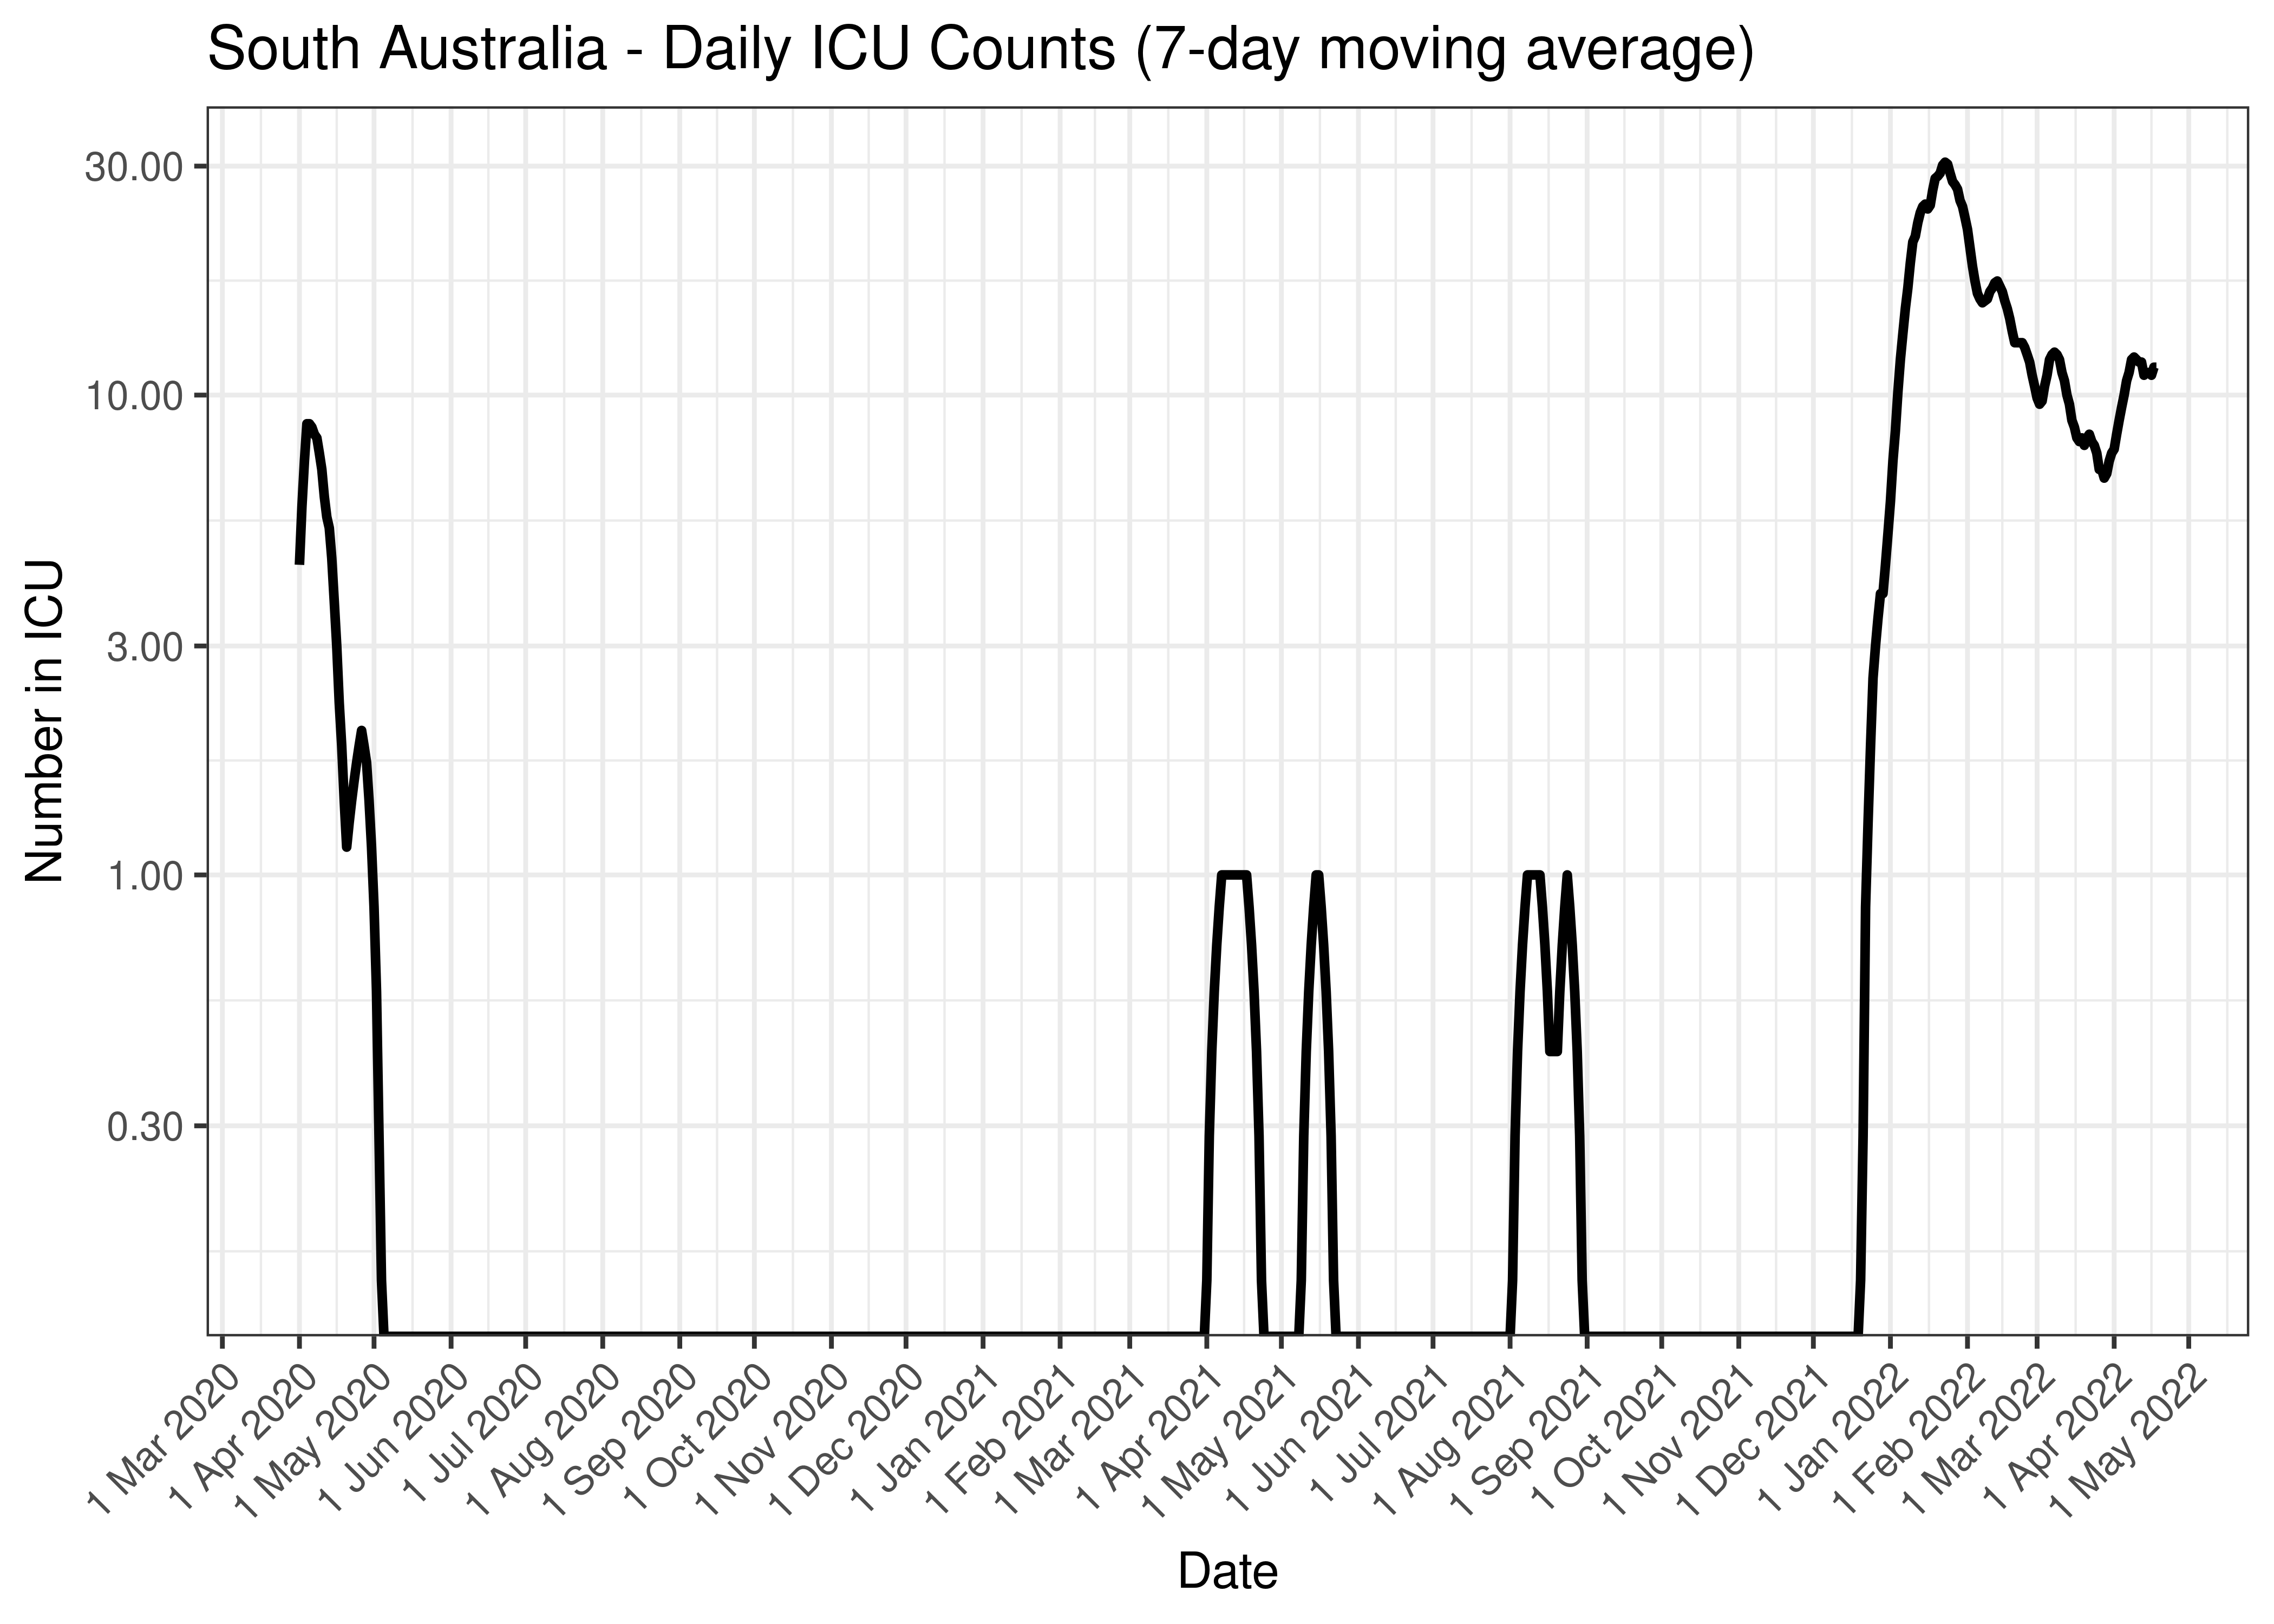 South Australia - Daily ICU Counts (7-day moving average)